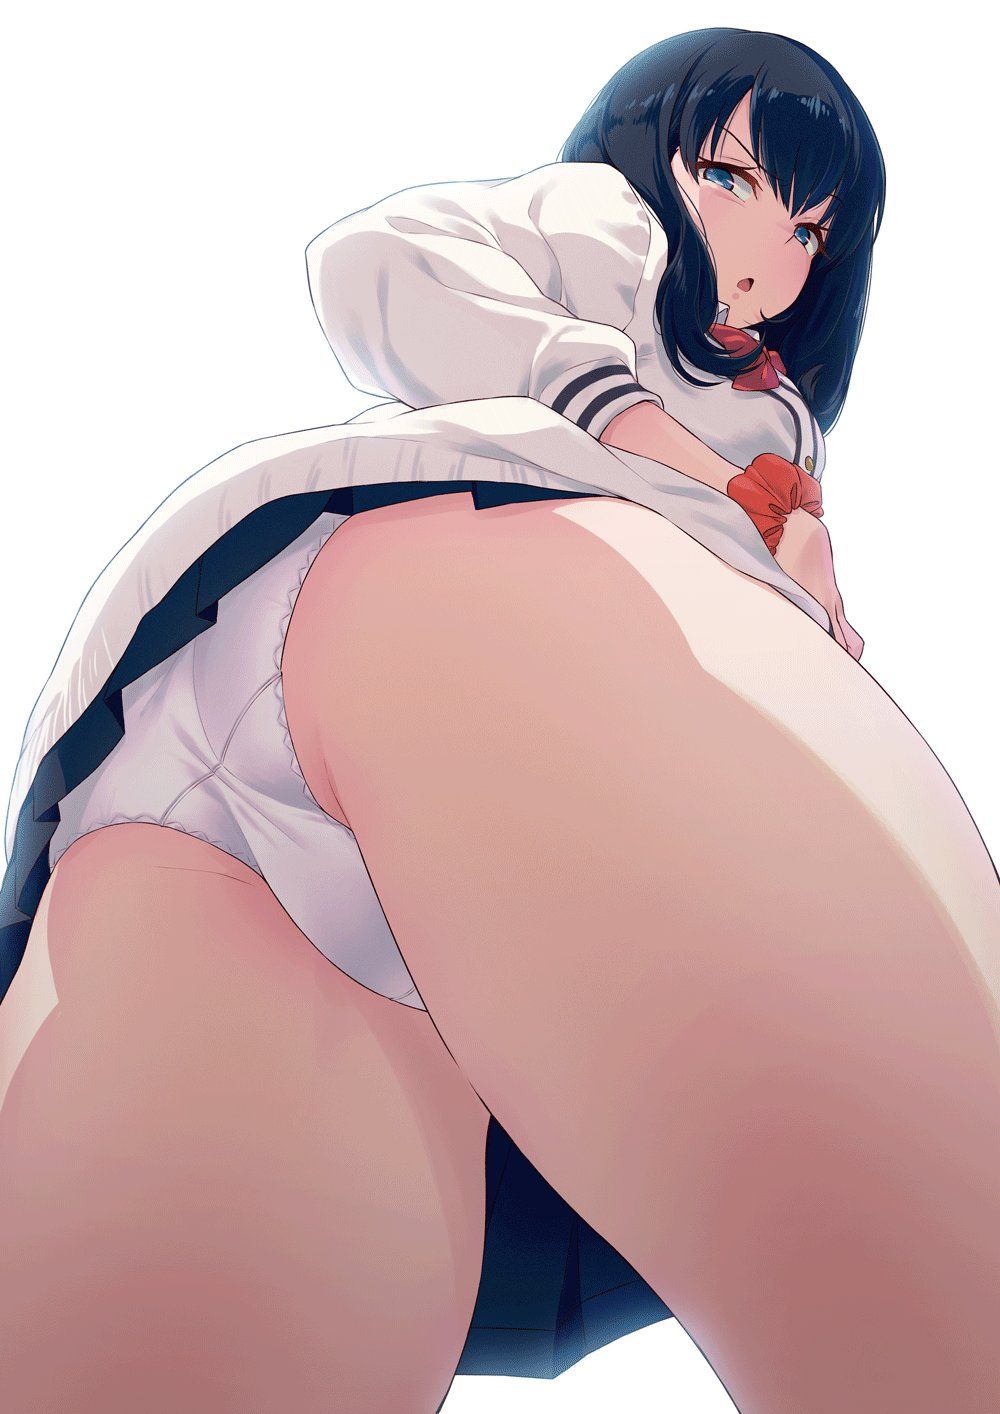 The image of SSSS.GRIDMAN that is too erotic is a foul! 9